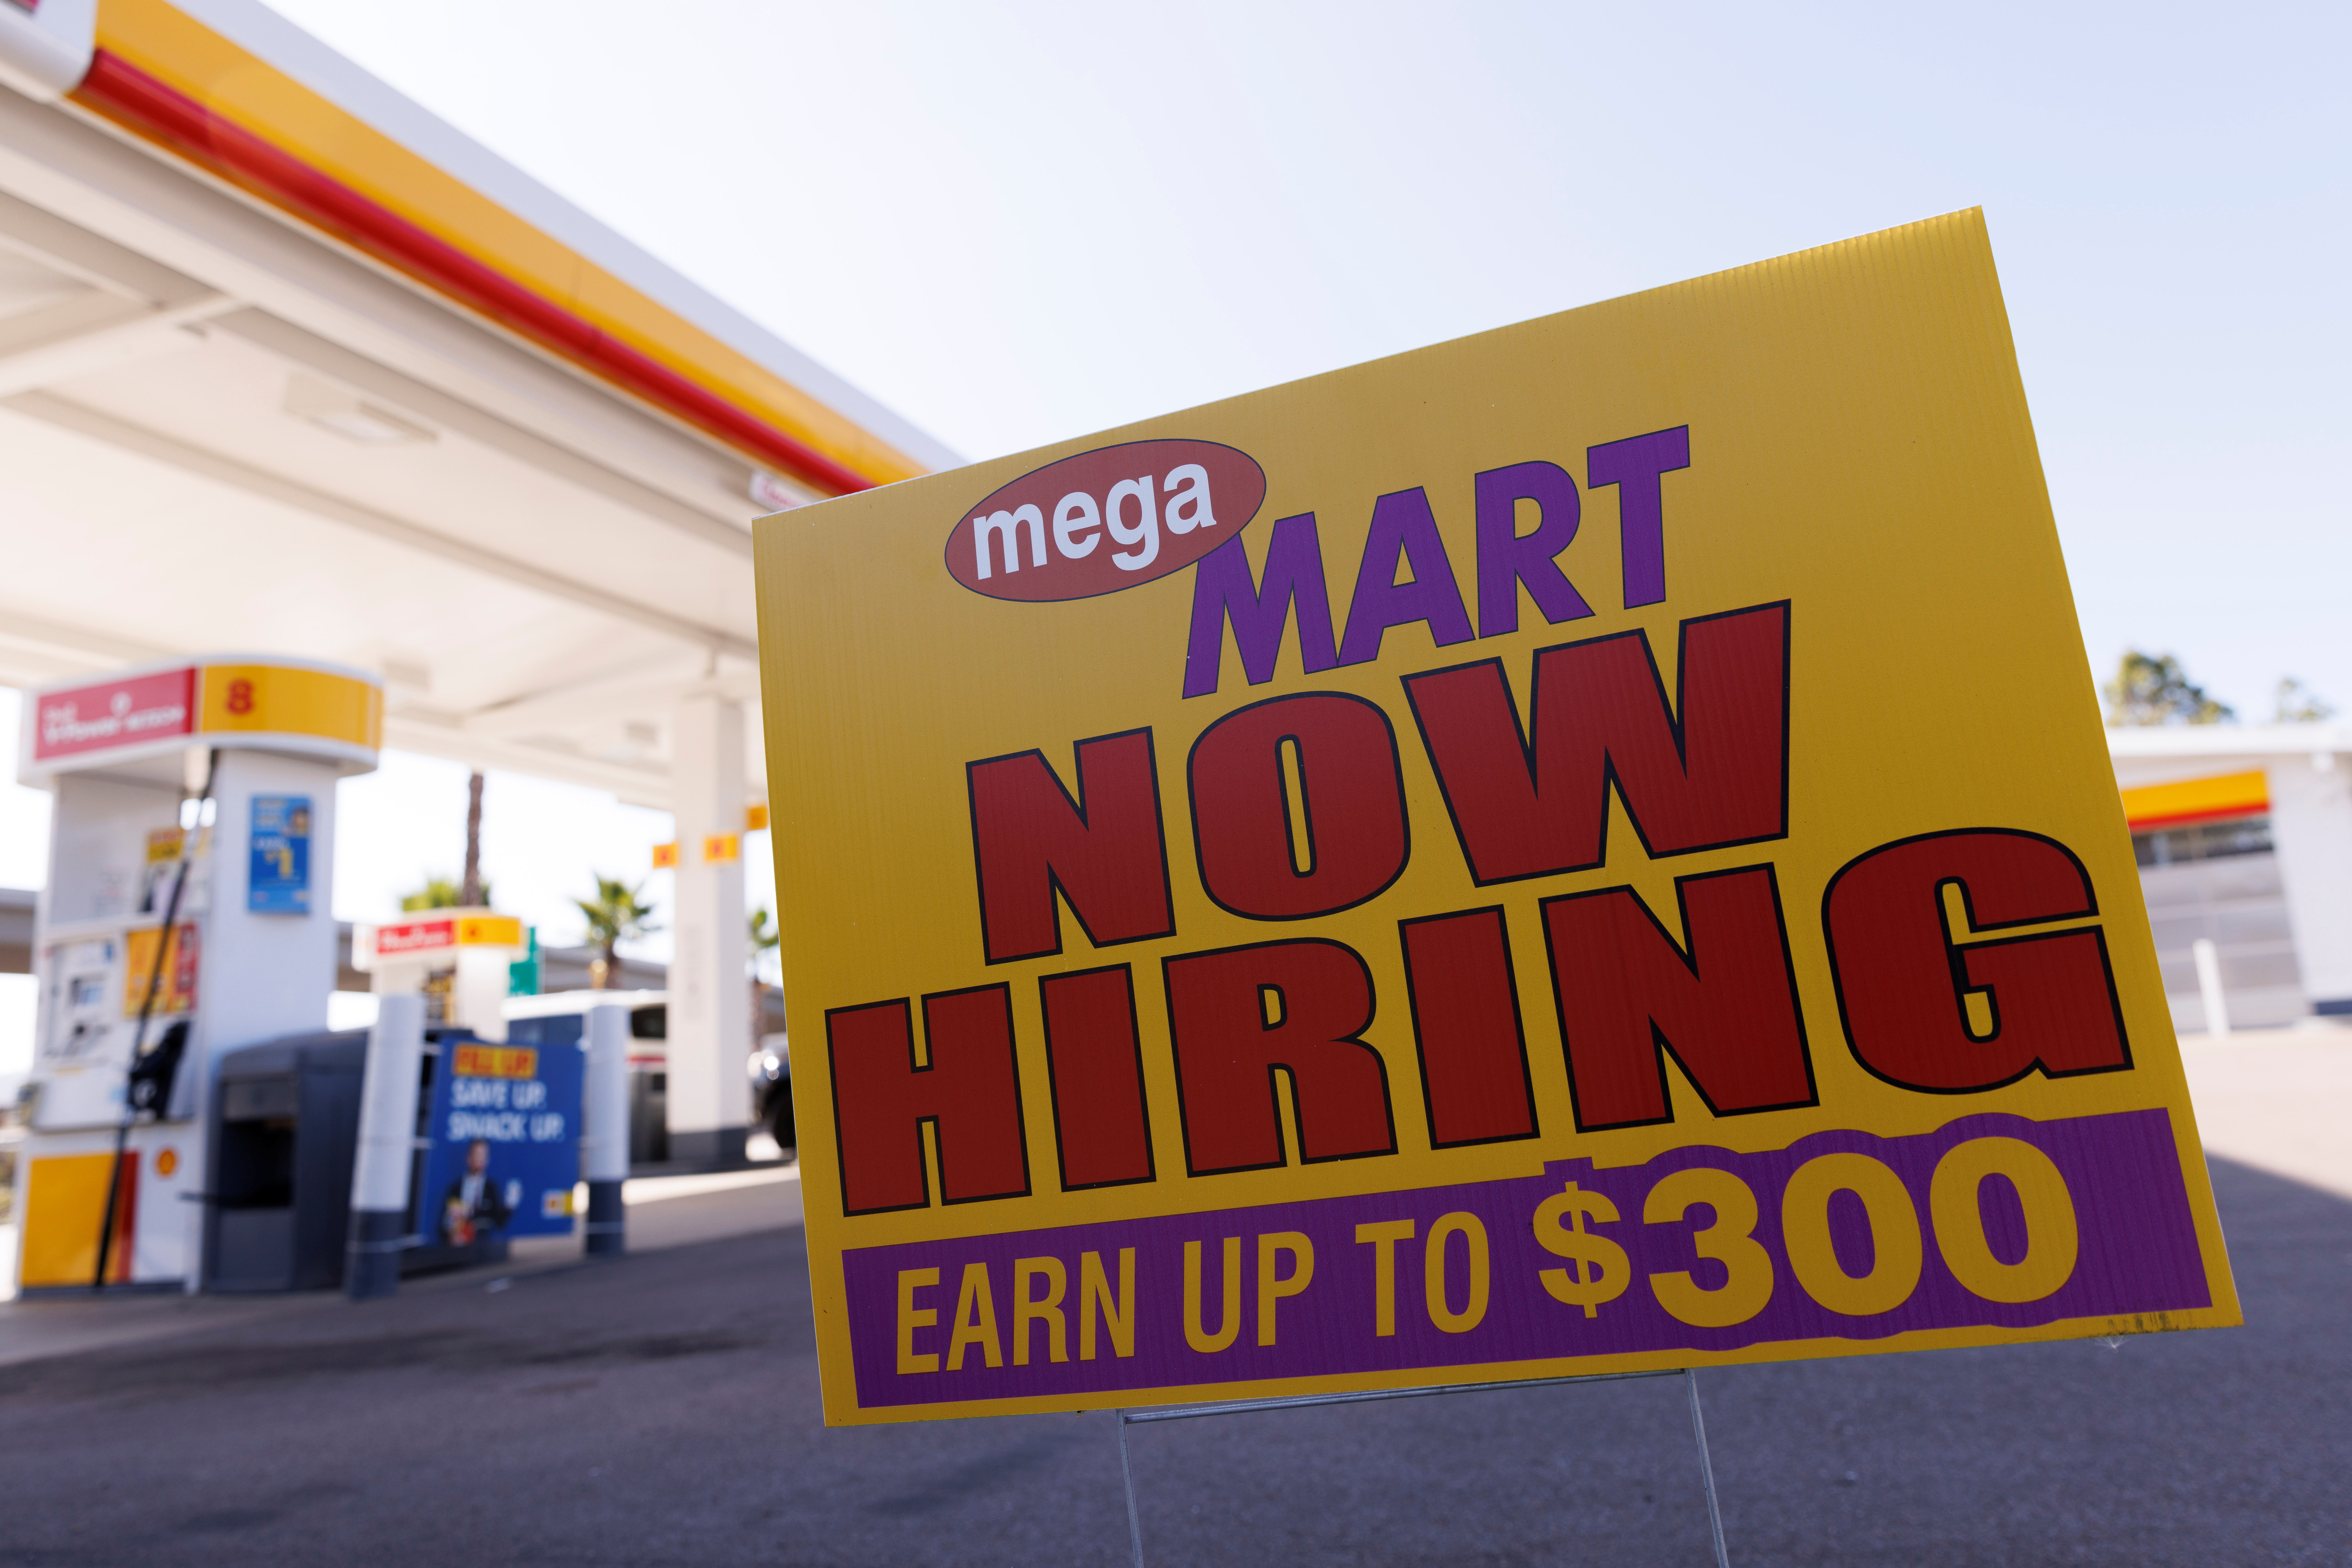 A job posting looking for workers is shown at a gas station in San Diego